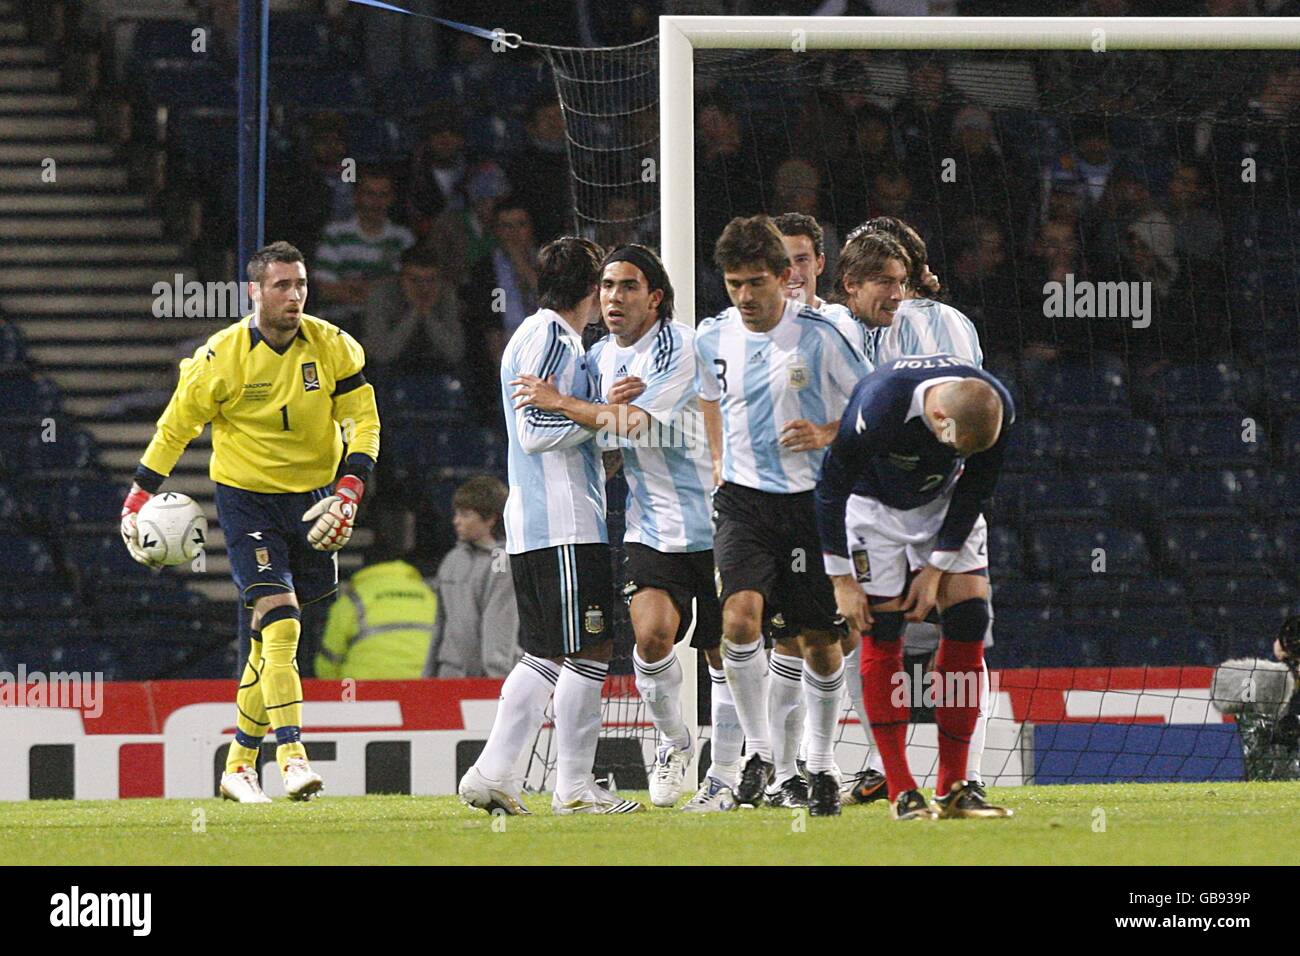 Argentina players celebrate with goalscorer Maximiliano Rodriguez (centre left) after scoring their first goal of the game as Scotland goalkeeper Allan McGregor and Alan Hutton (front) react Stock Photo